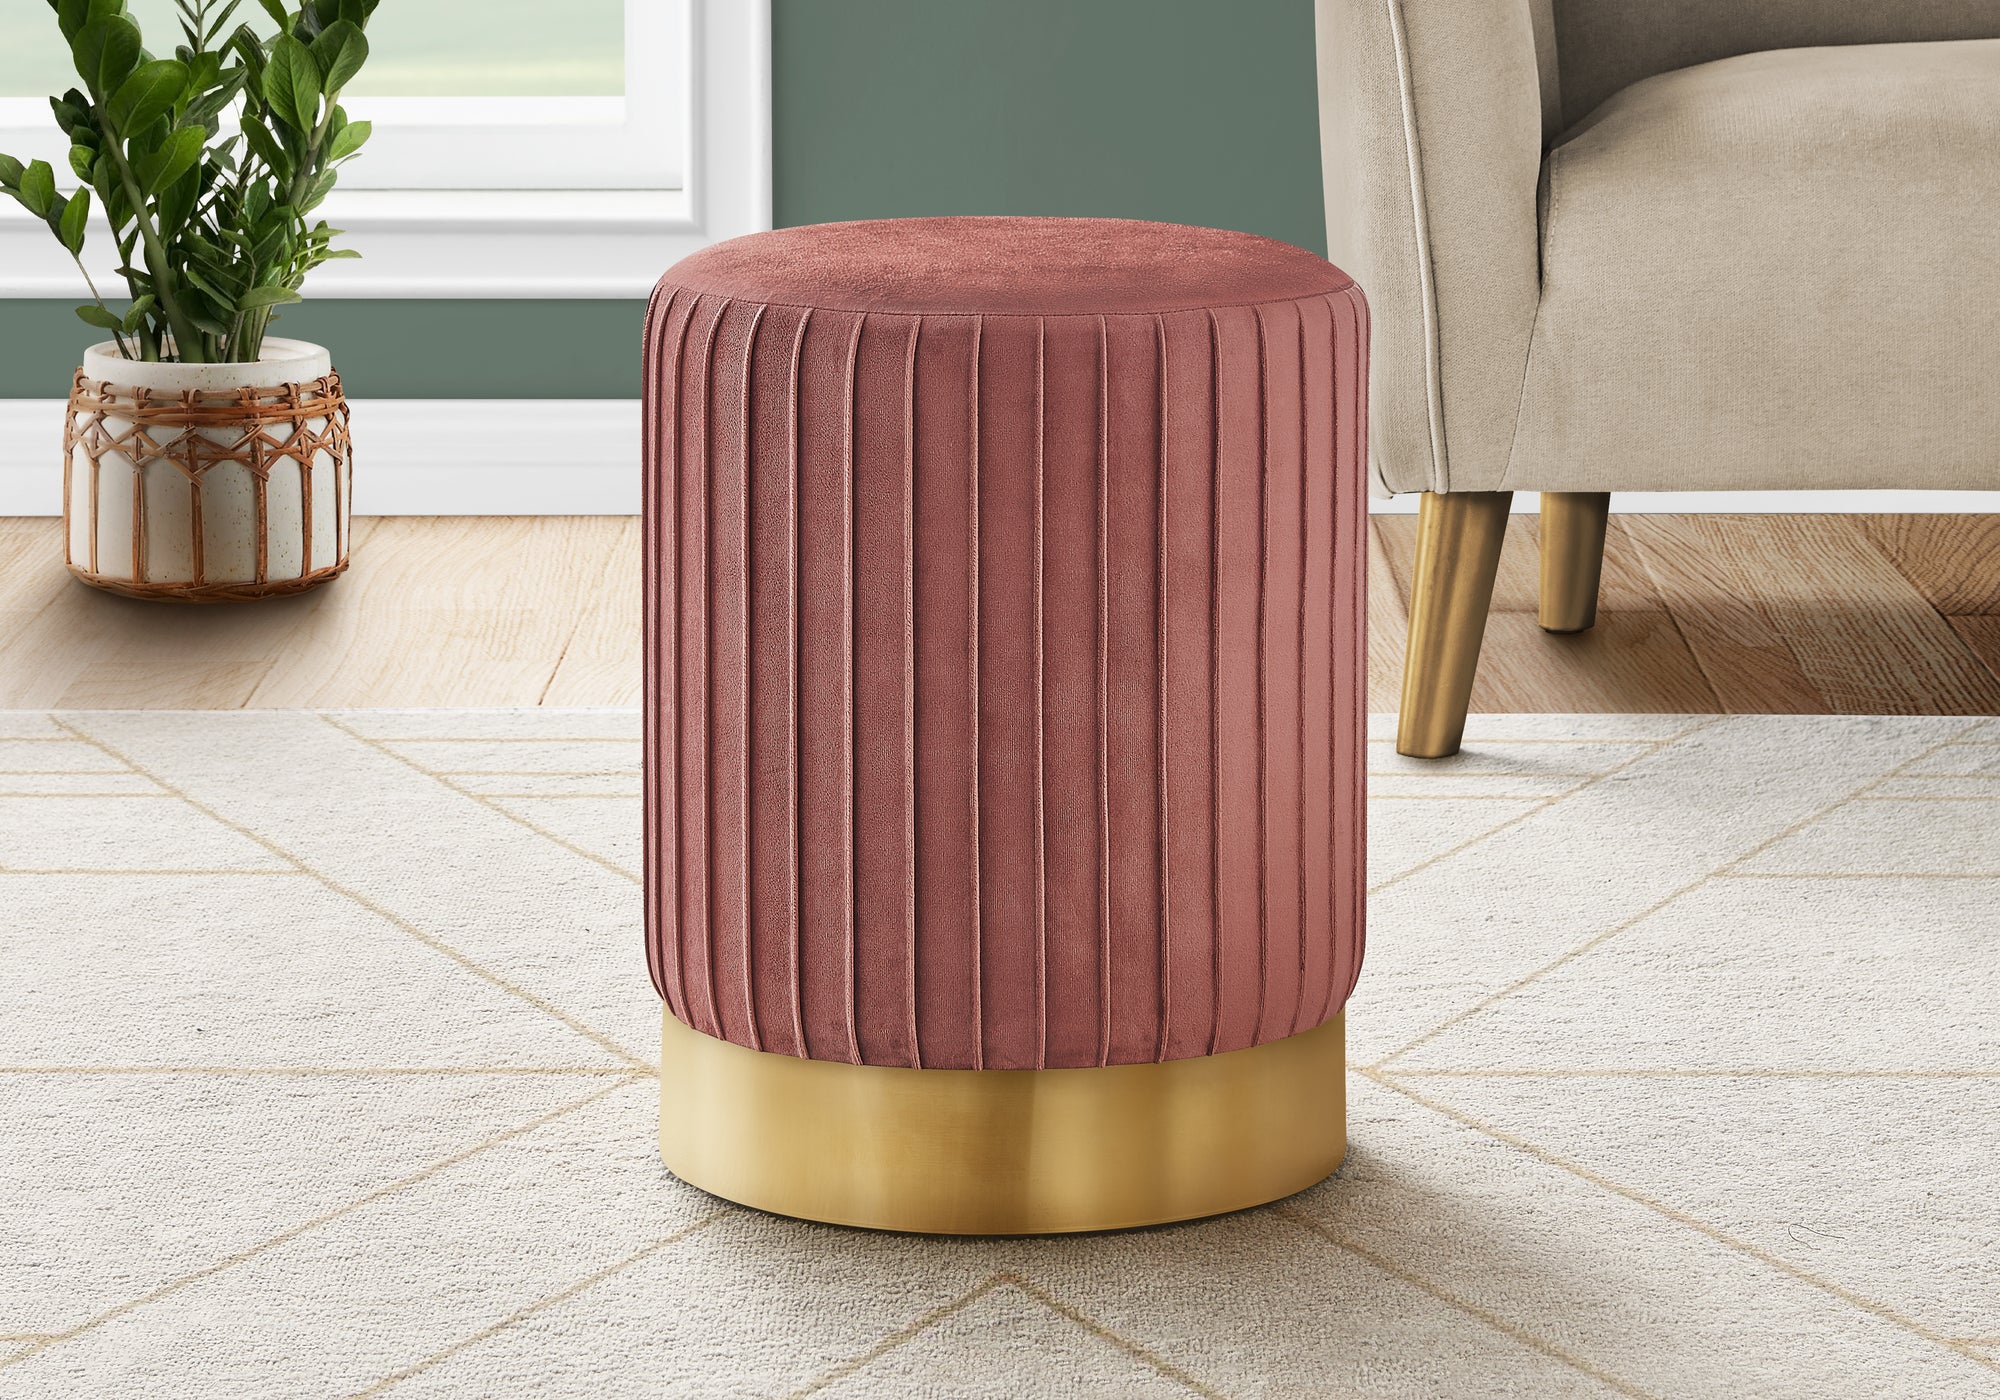 MN-289017    Ottoman, Pouf, Footrest, Foot Stool, 14" Round, Velvet Fabric, Metal Base, Pink, Gold, Contemporary, Glam, Modern